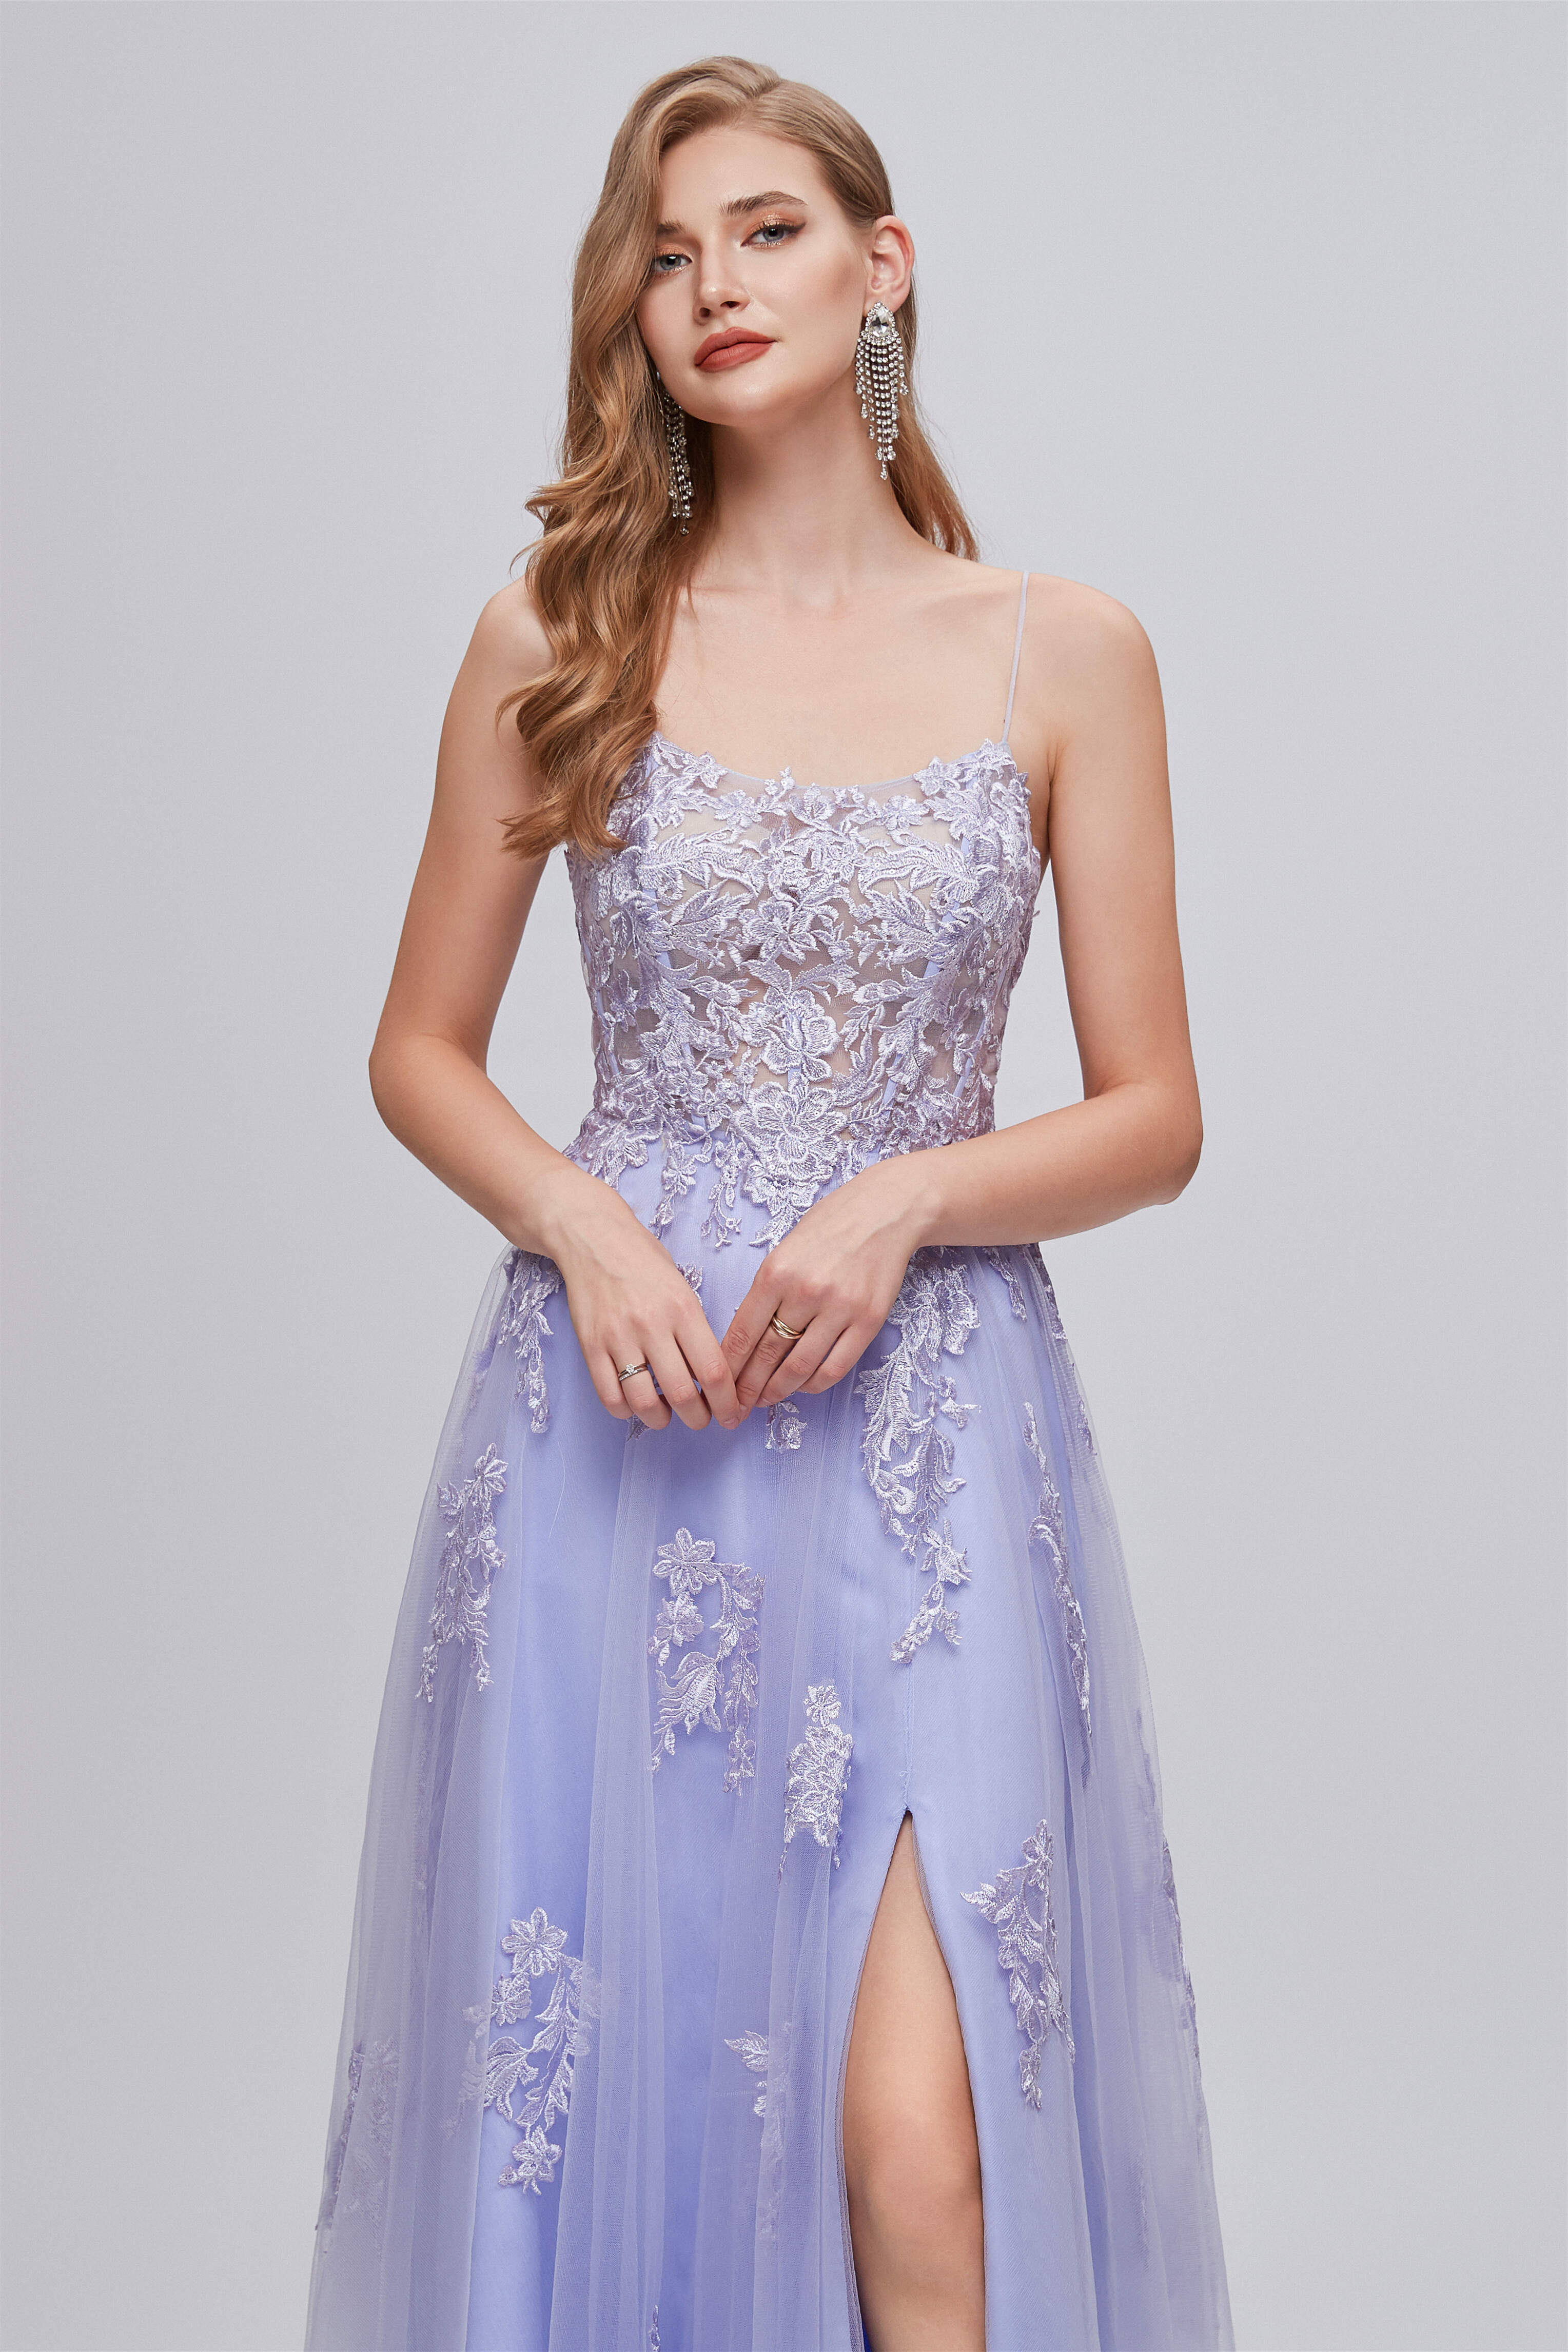 Lilac Appliques Lace-Up A-Line Long Corset Prom Dresses with Slit Gowns, Formal Dress For Wedding Guest